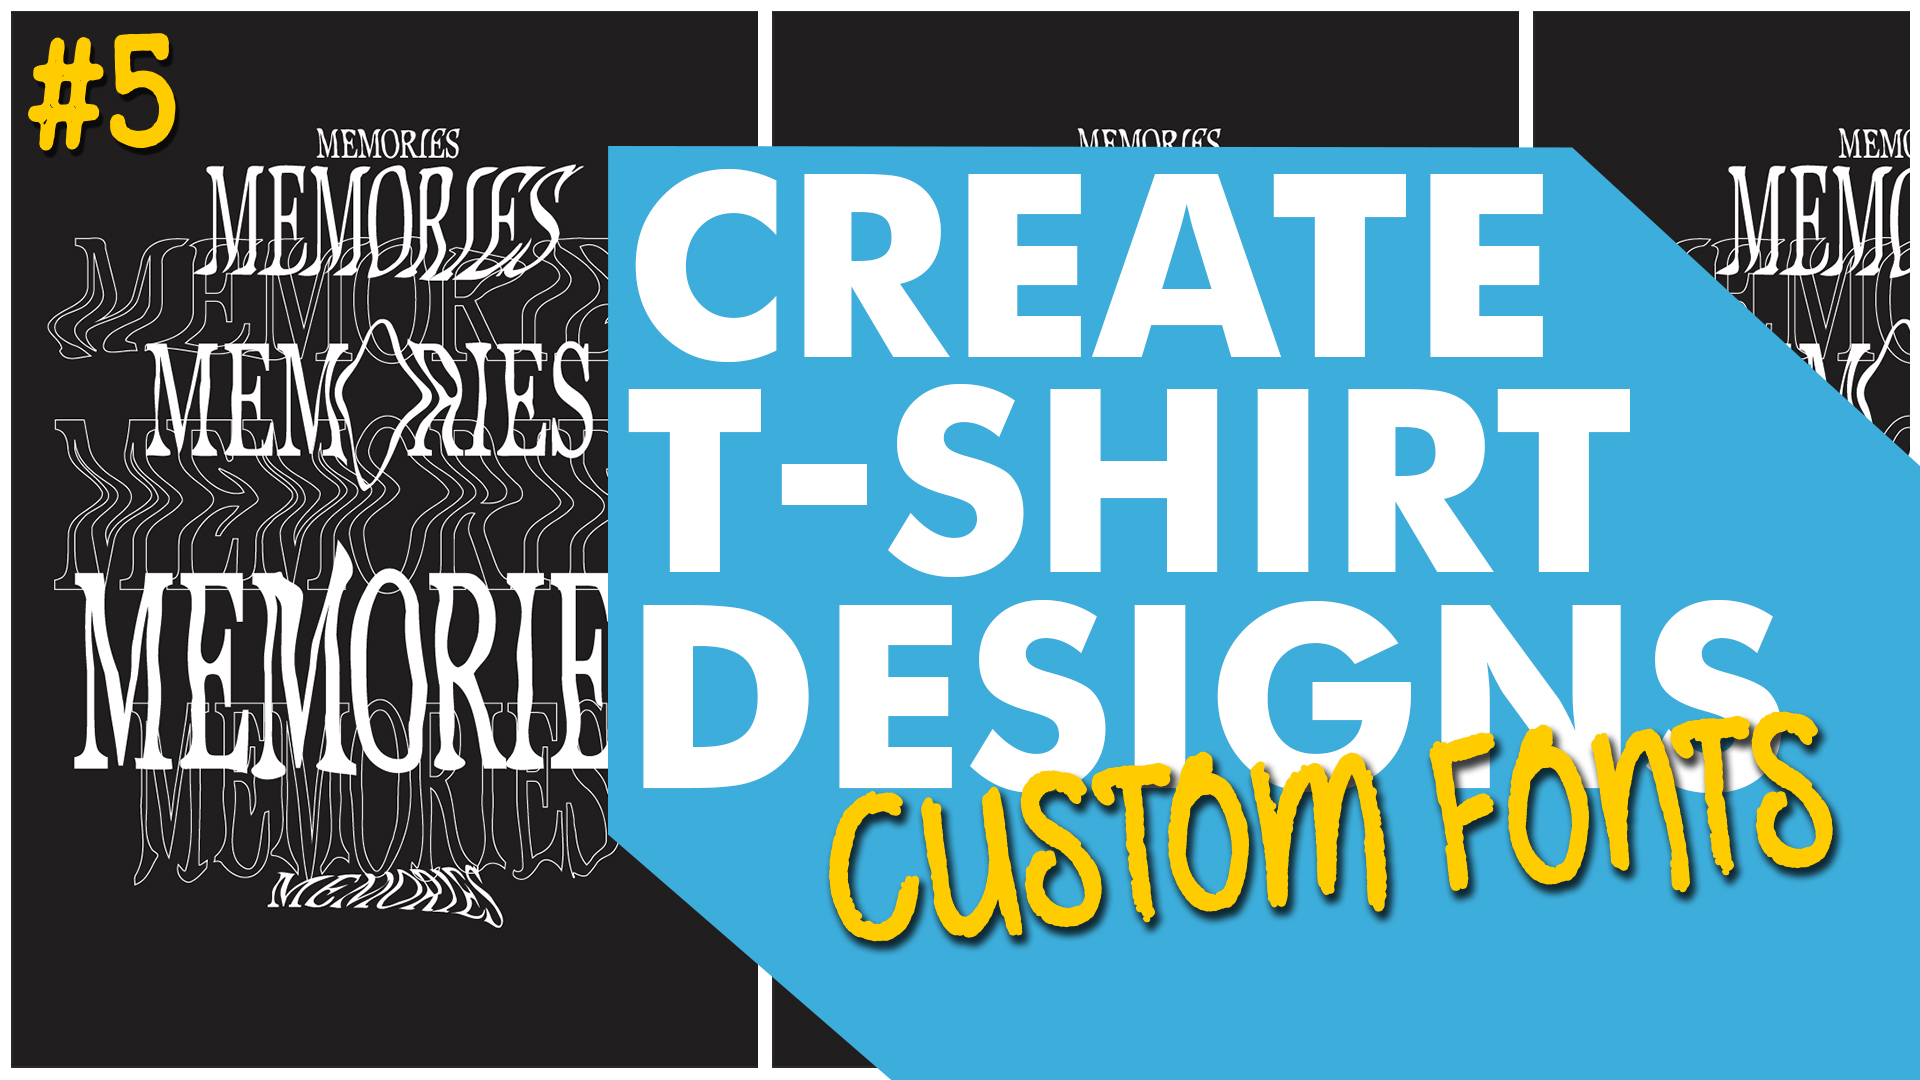 How to Create Custom T-Shirts with FOREVER Flex Soft Heat Transfer Paper